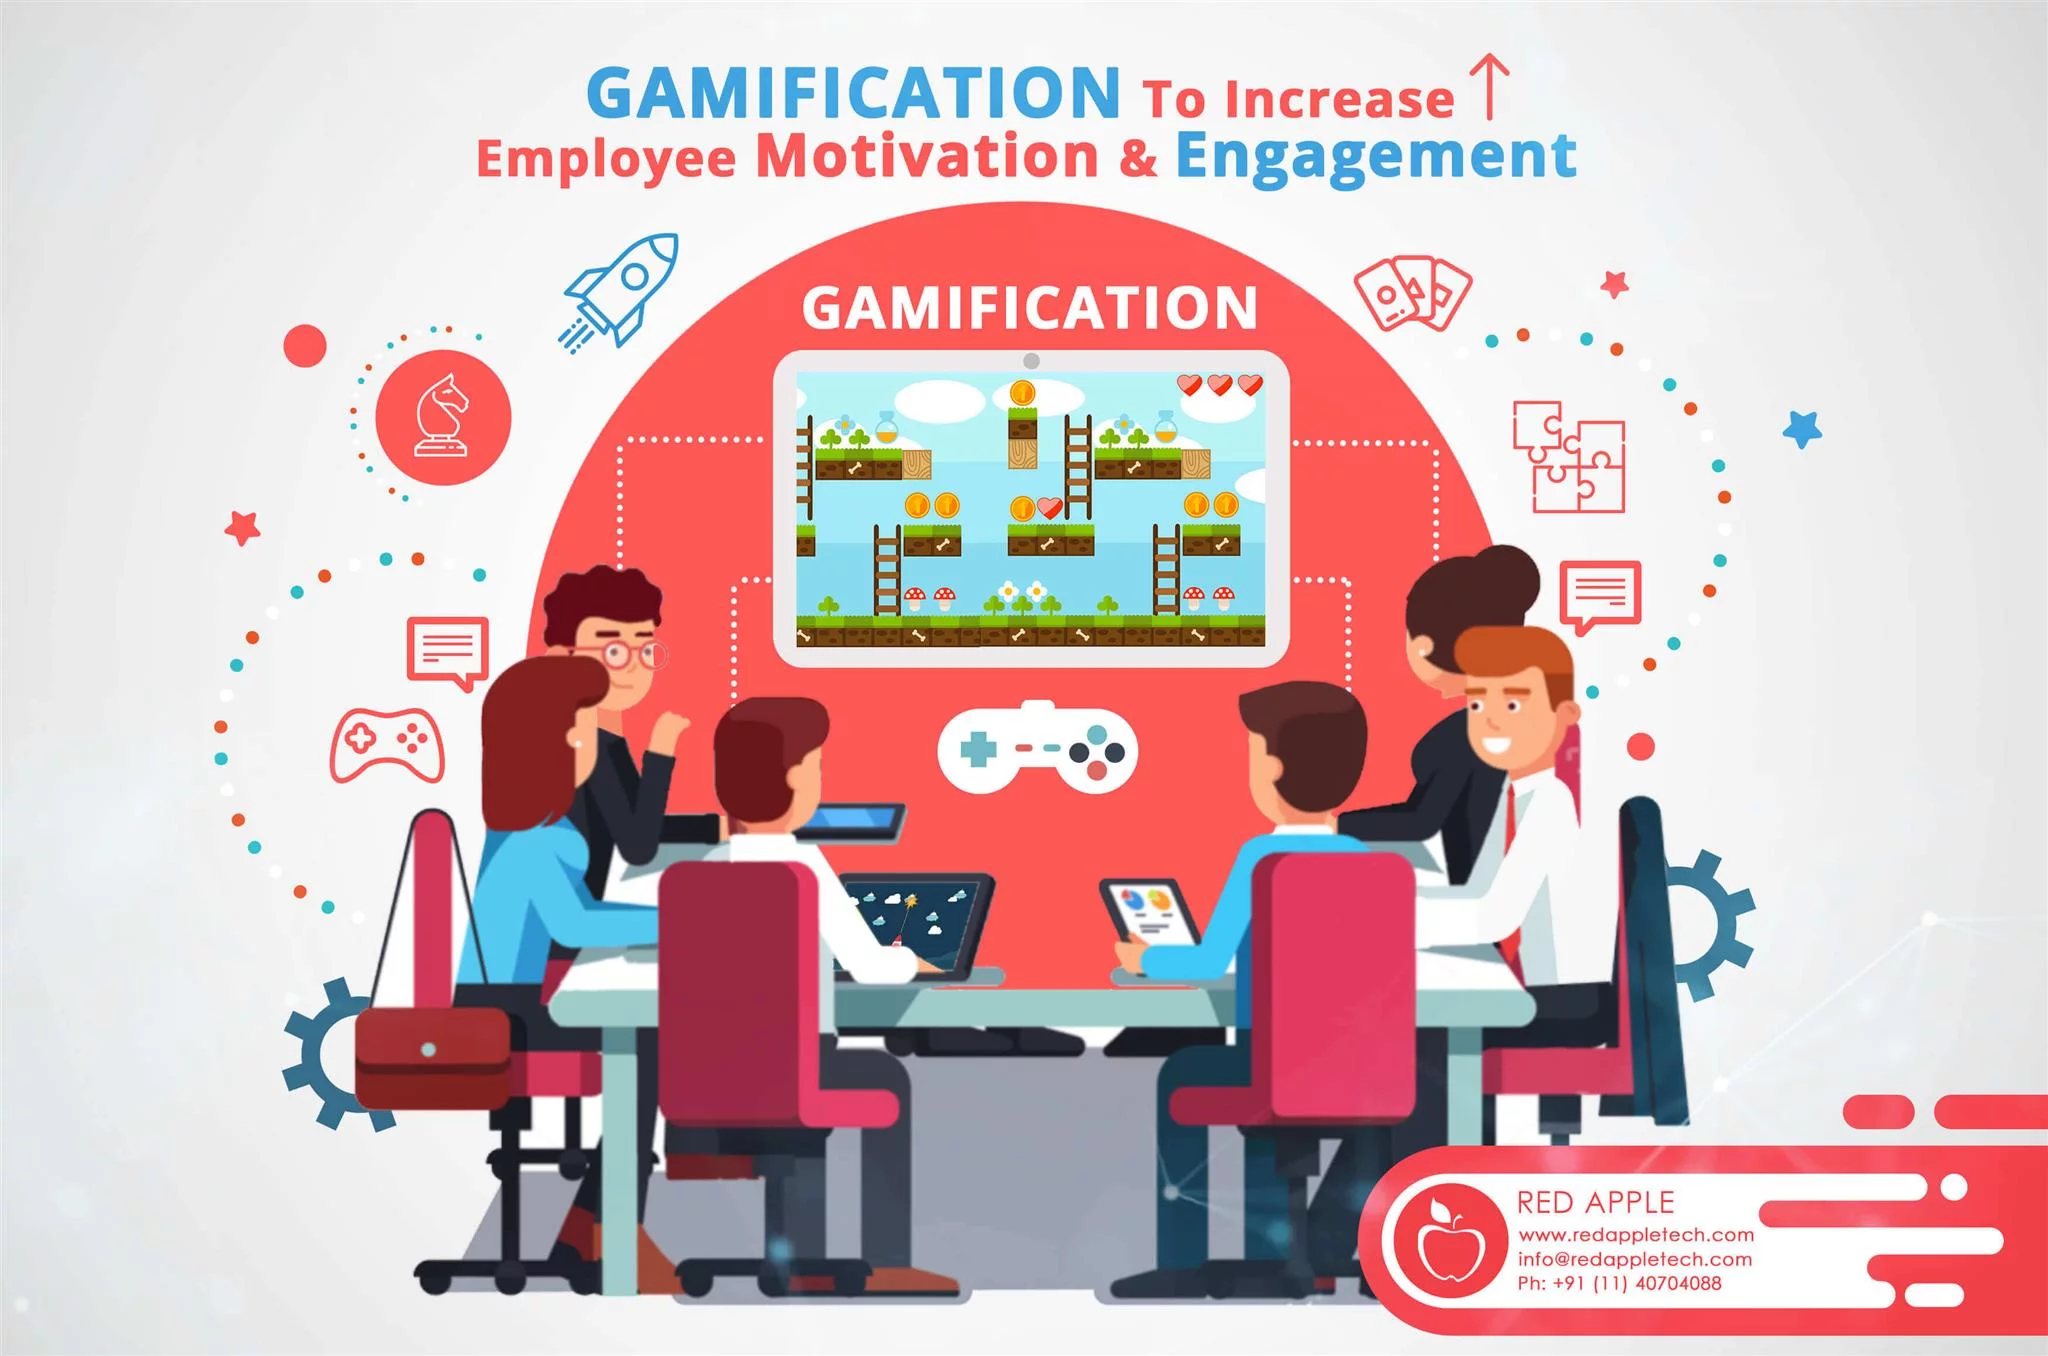 Cultivating Employee Engagement Through Gamification